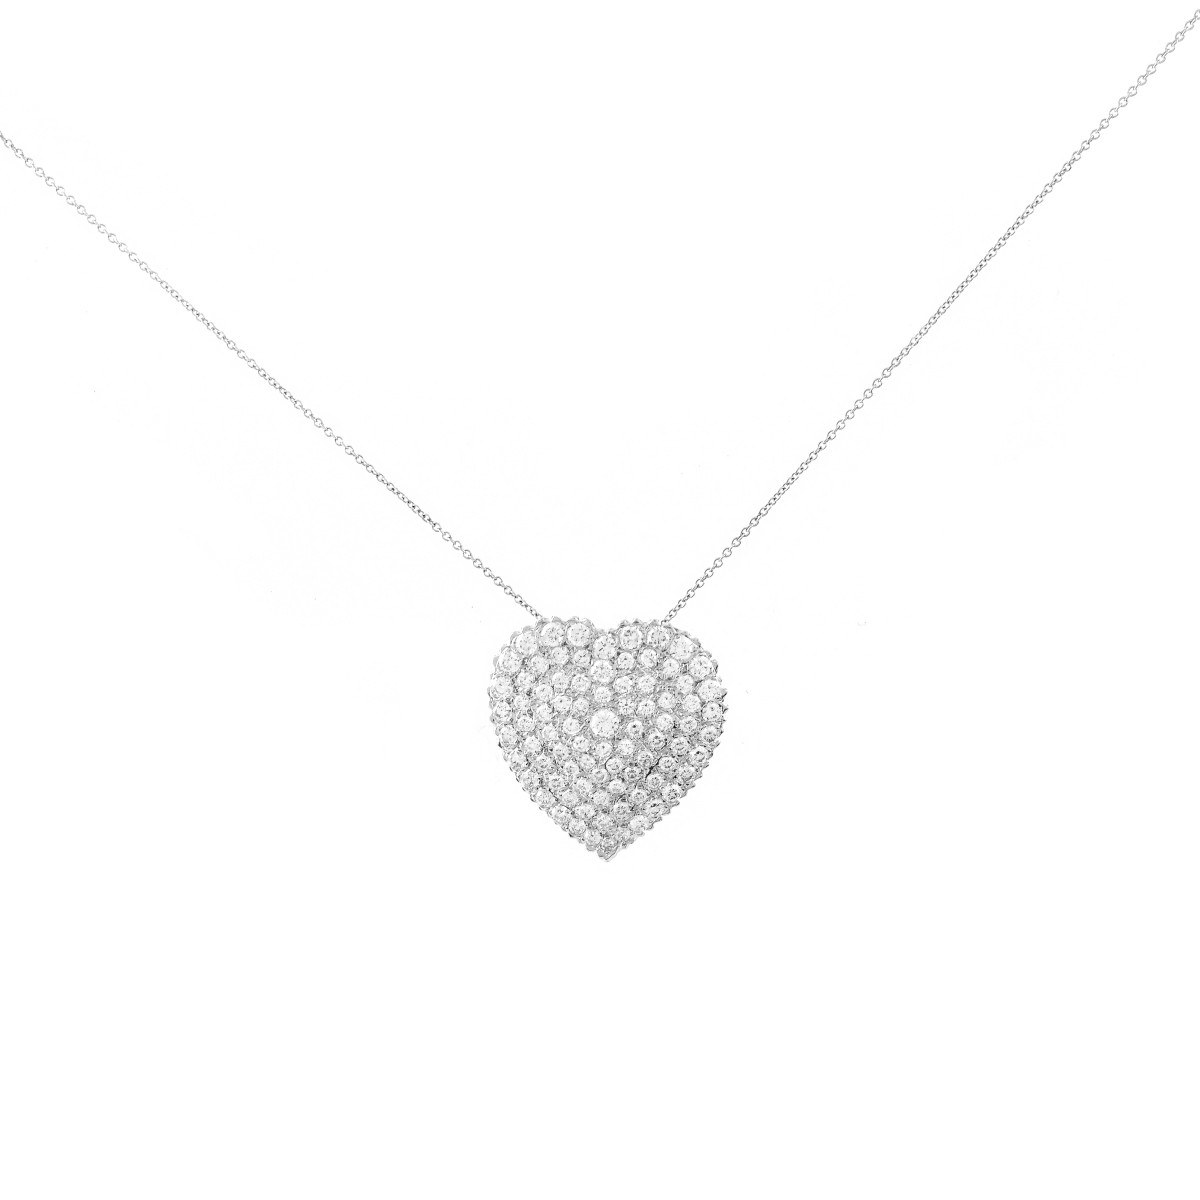 Diamond and 14K Gold Heart Necklace | Kodner Auctions